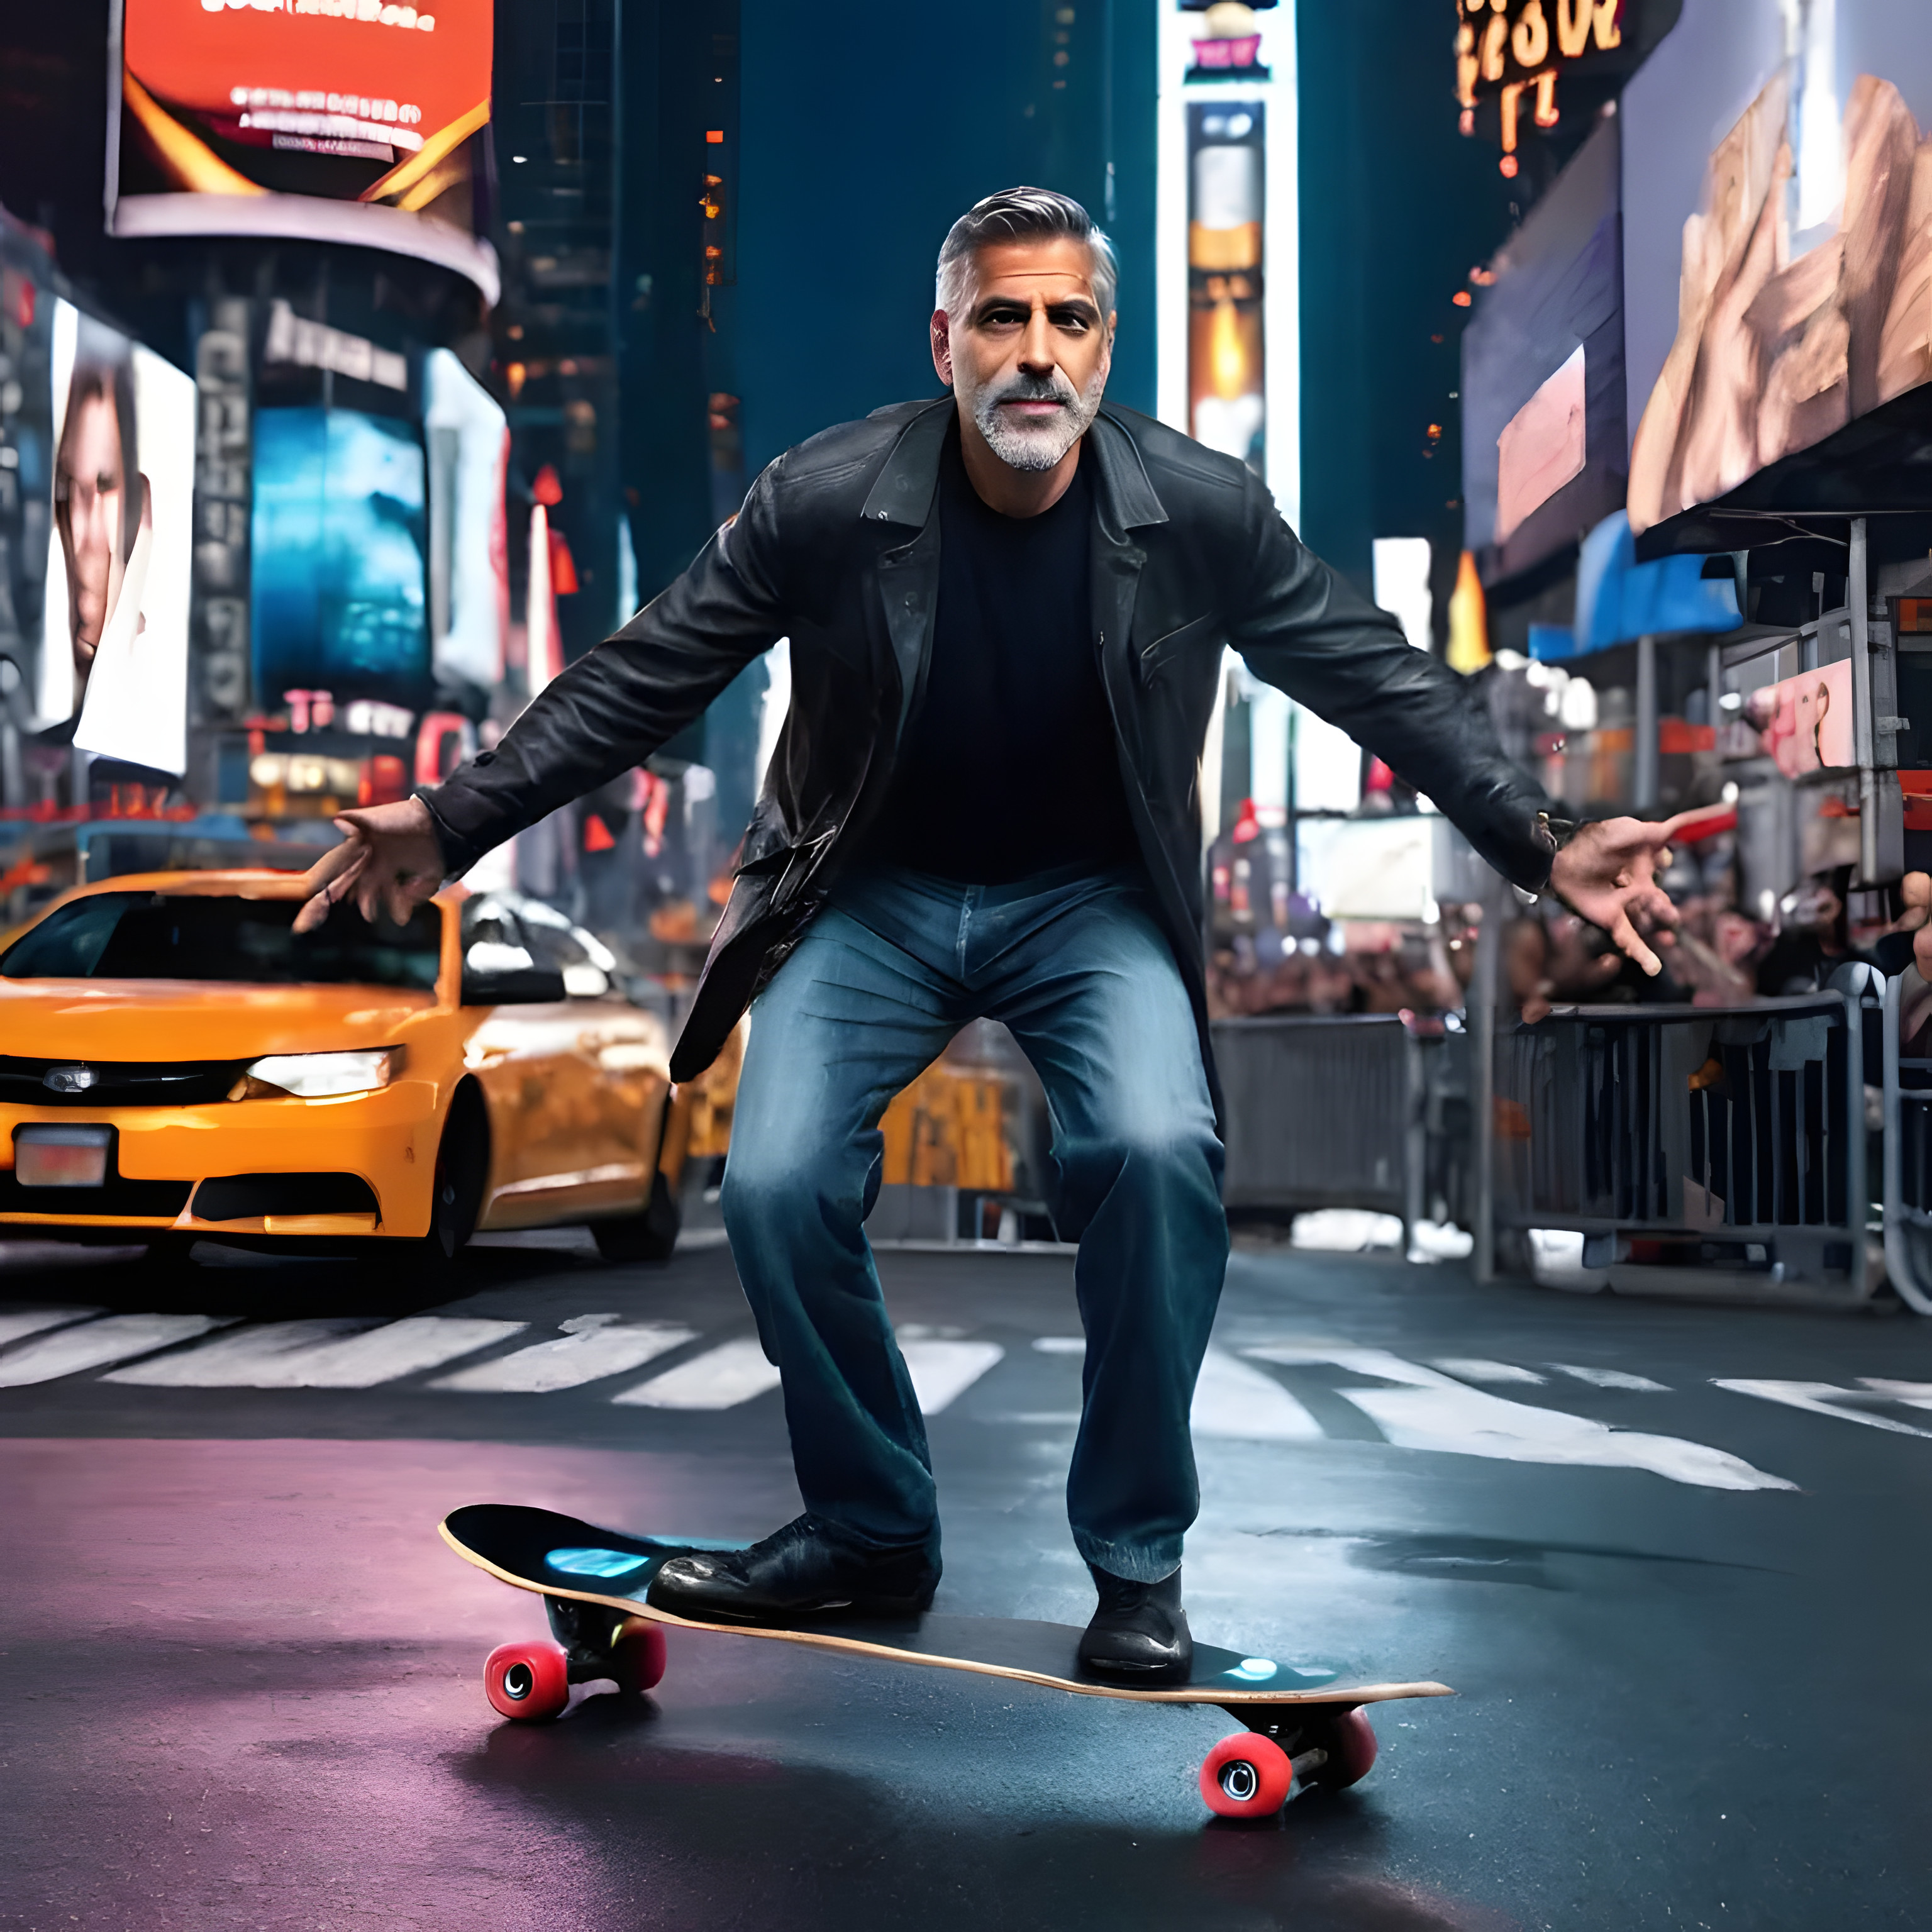 george_clooney_riding_a_longboard_at_new_your_times_square_at_night_in_a_sexy_pose_high_res_de...JPG